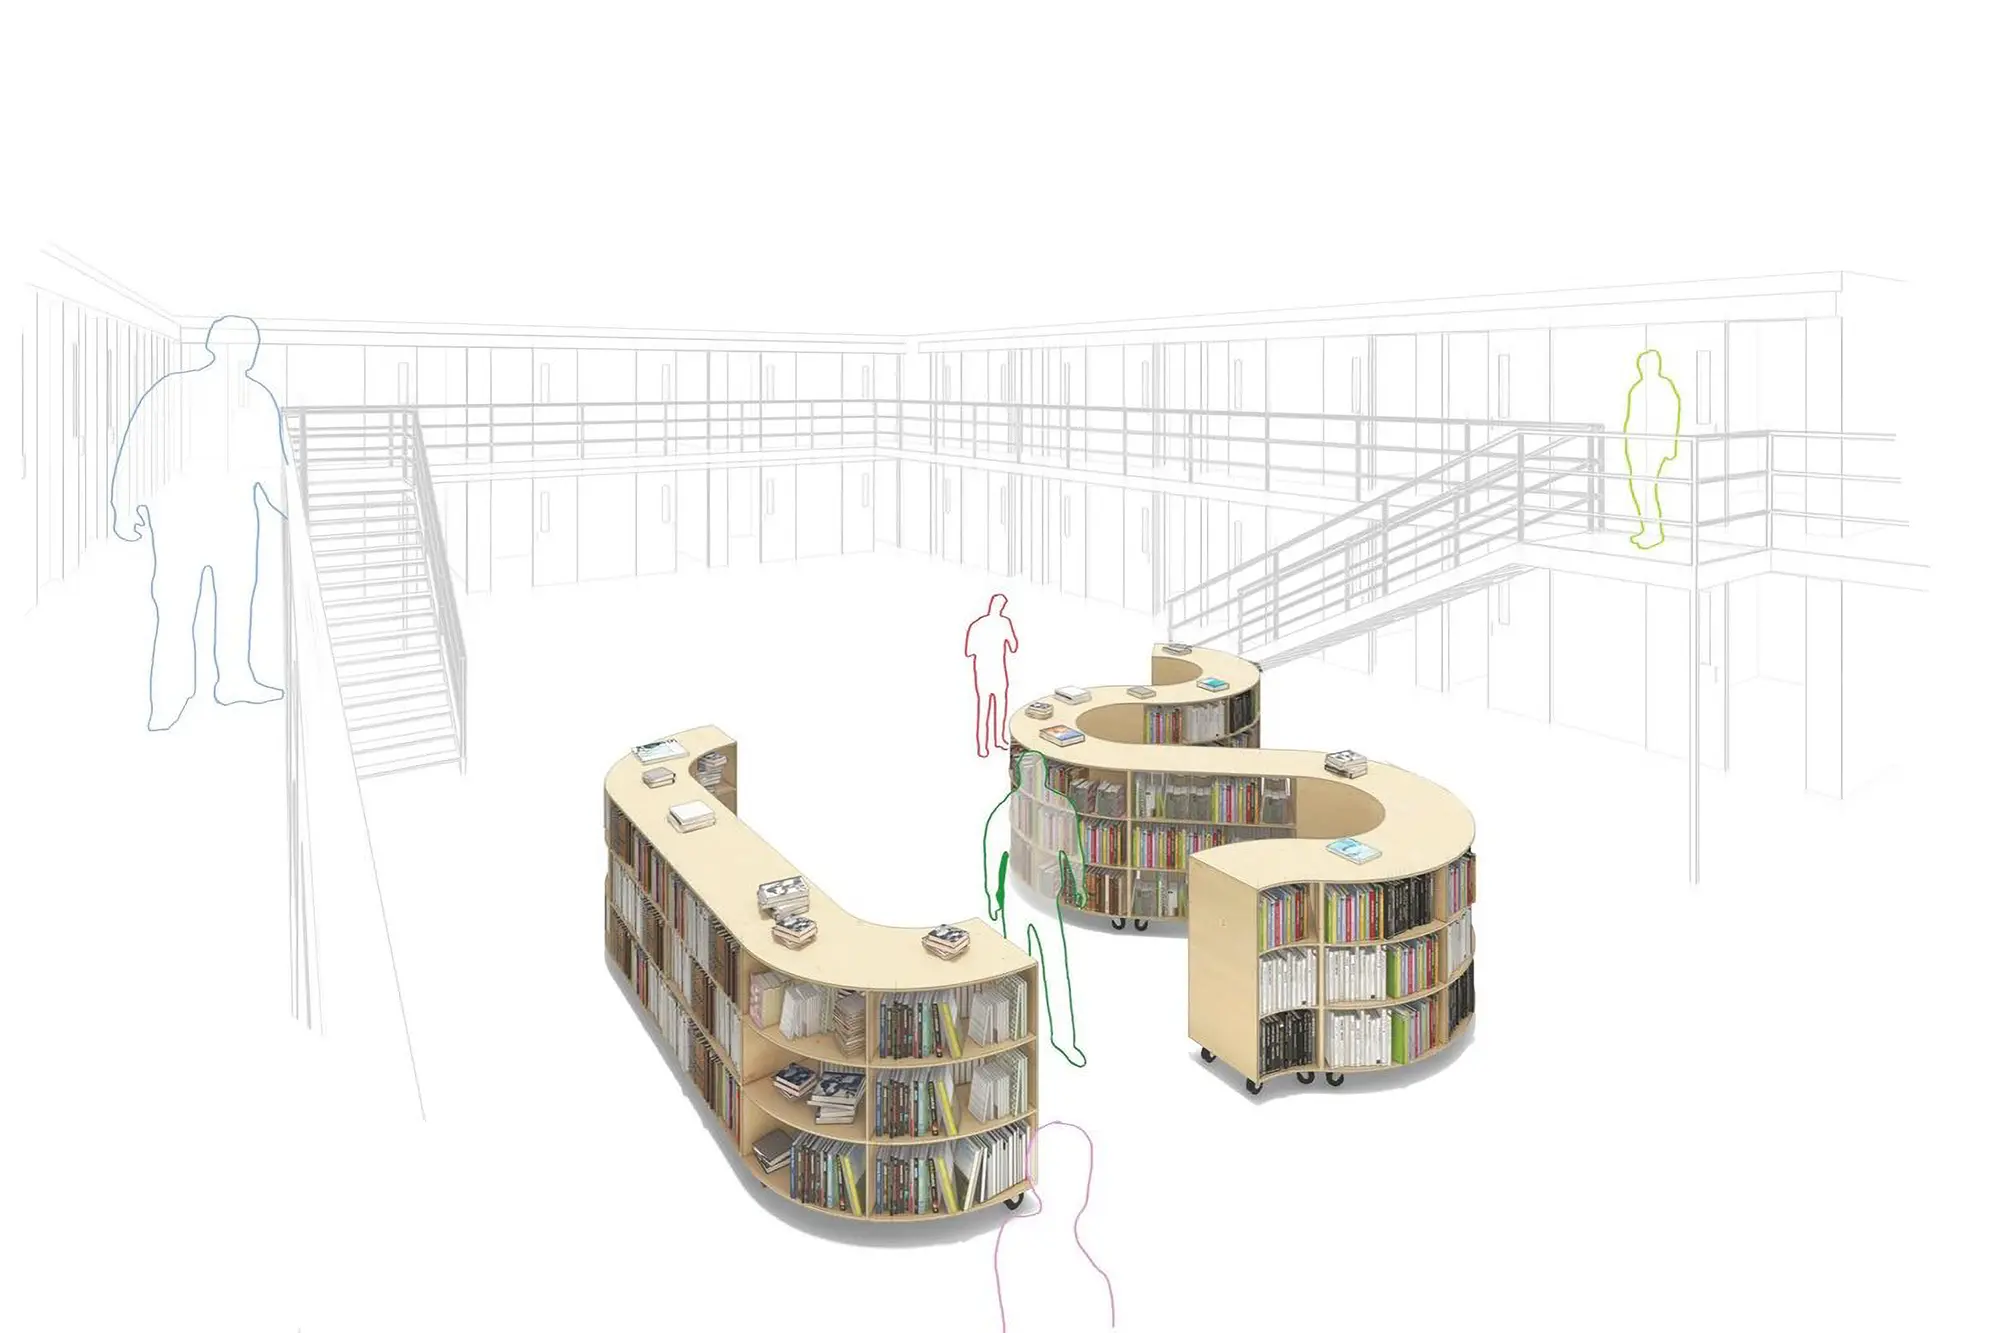 Preliminary concept rendering of the Freedom Library by Mass Design.